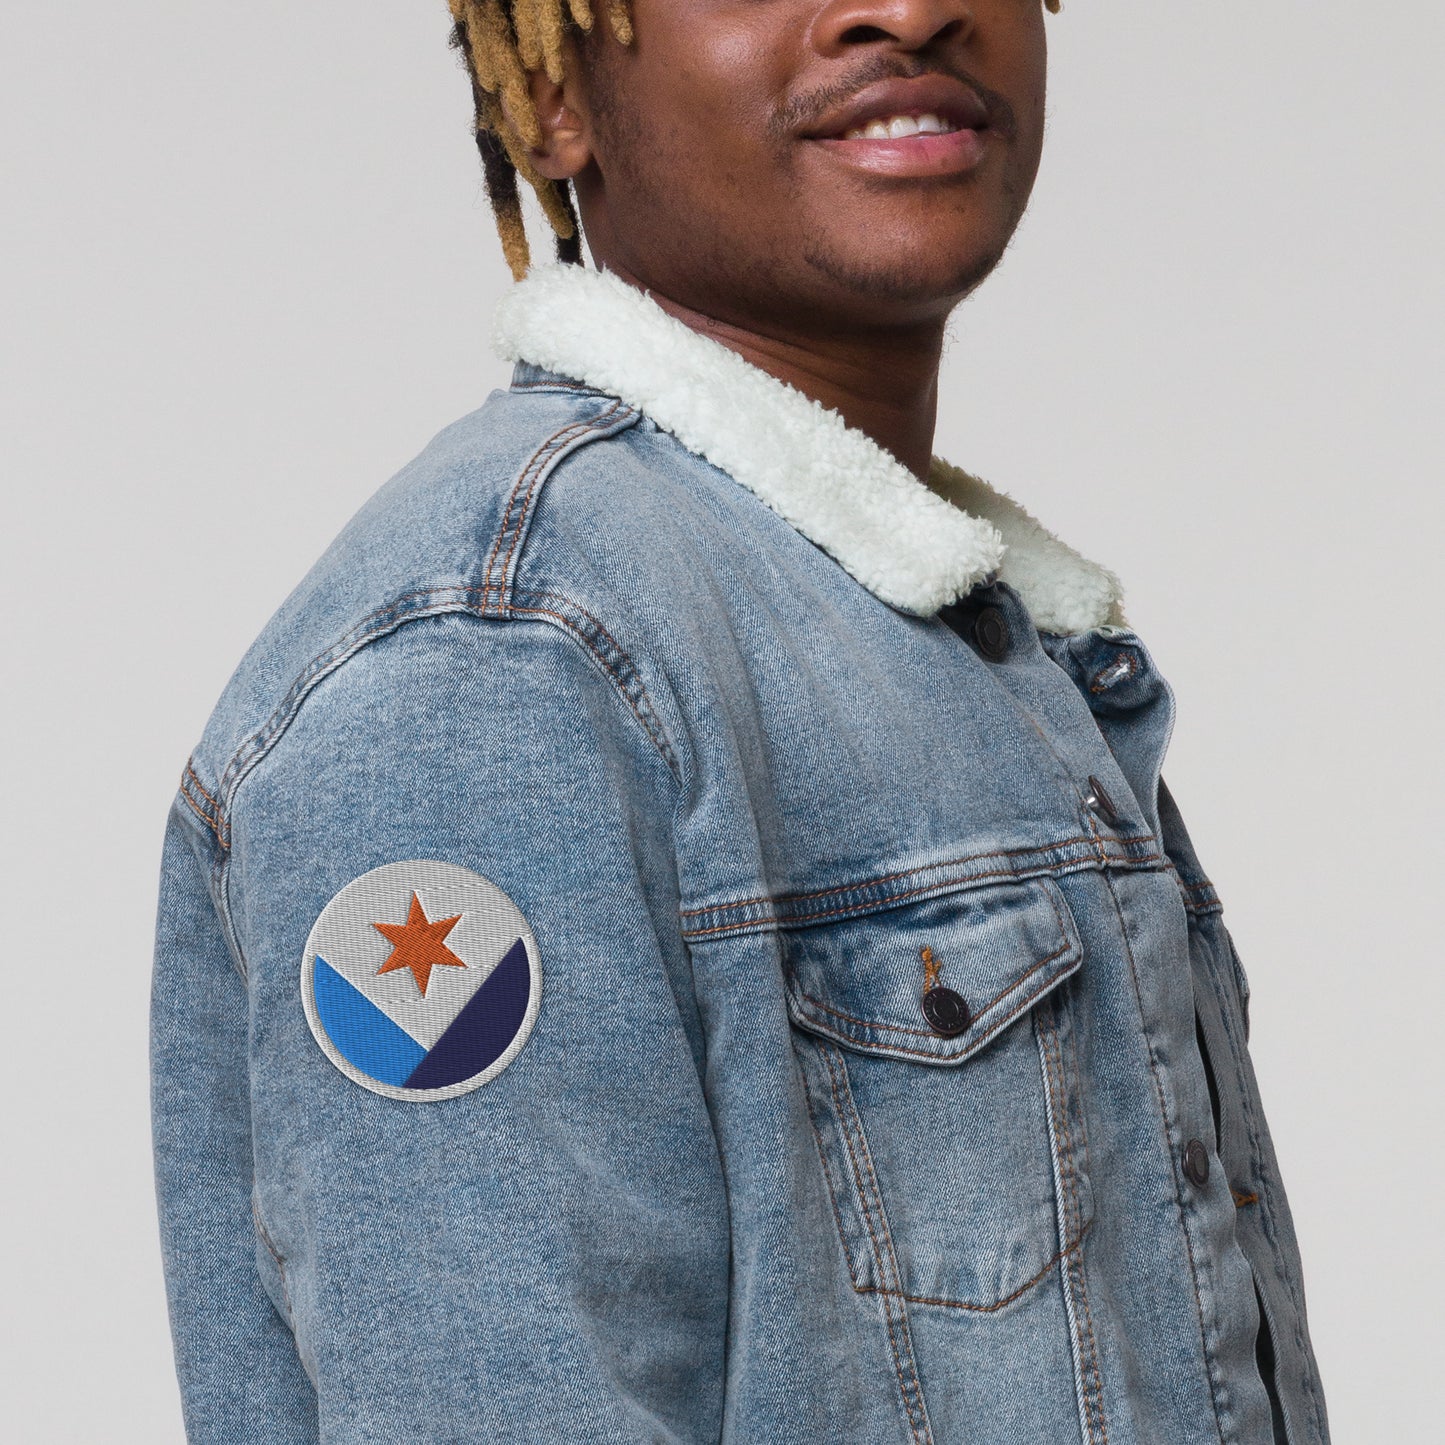 A man wearing a denim jacket with a Syracuse, NY city flag embroidered patch affixed to the sleeve